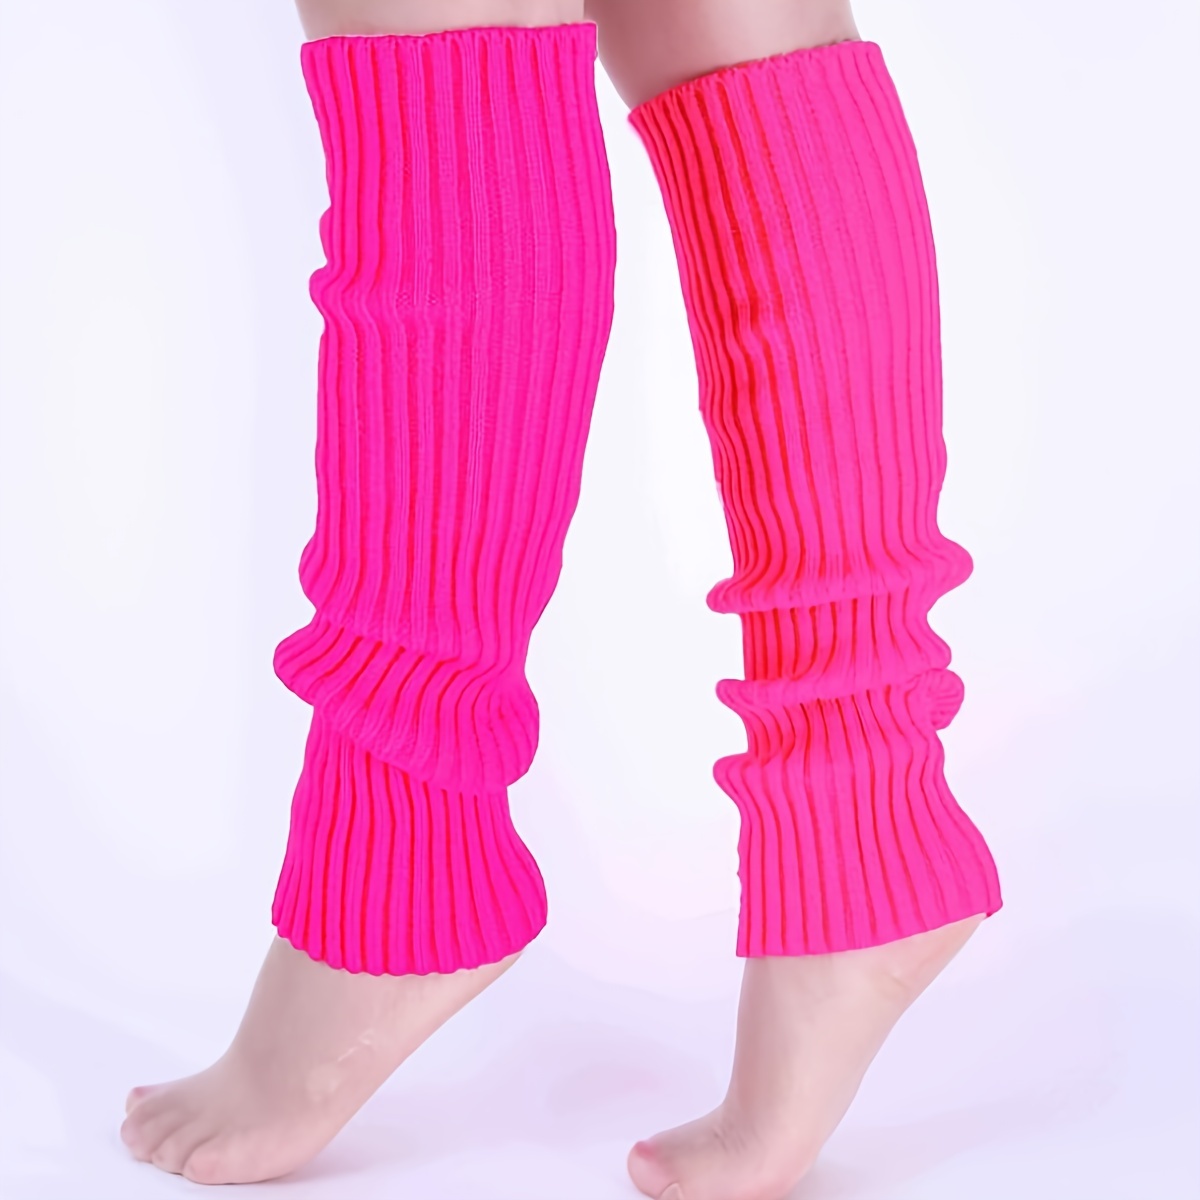 2 Pairs 80s Neon Leg Warmers for Girls Toddler Knit Ribbed Leg Socks for  1980s Halloween Party Cosplay Costume Accessory